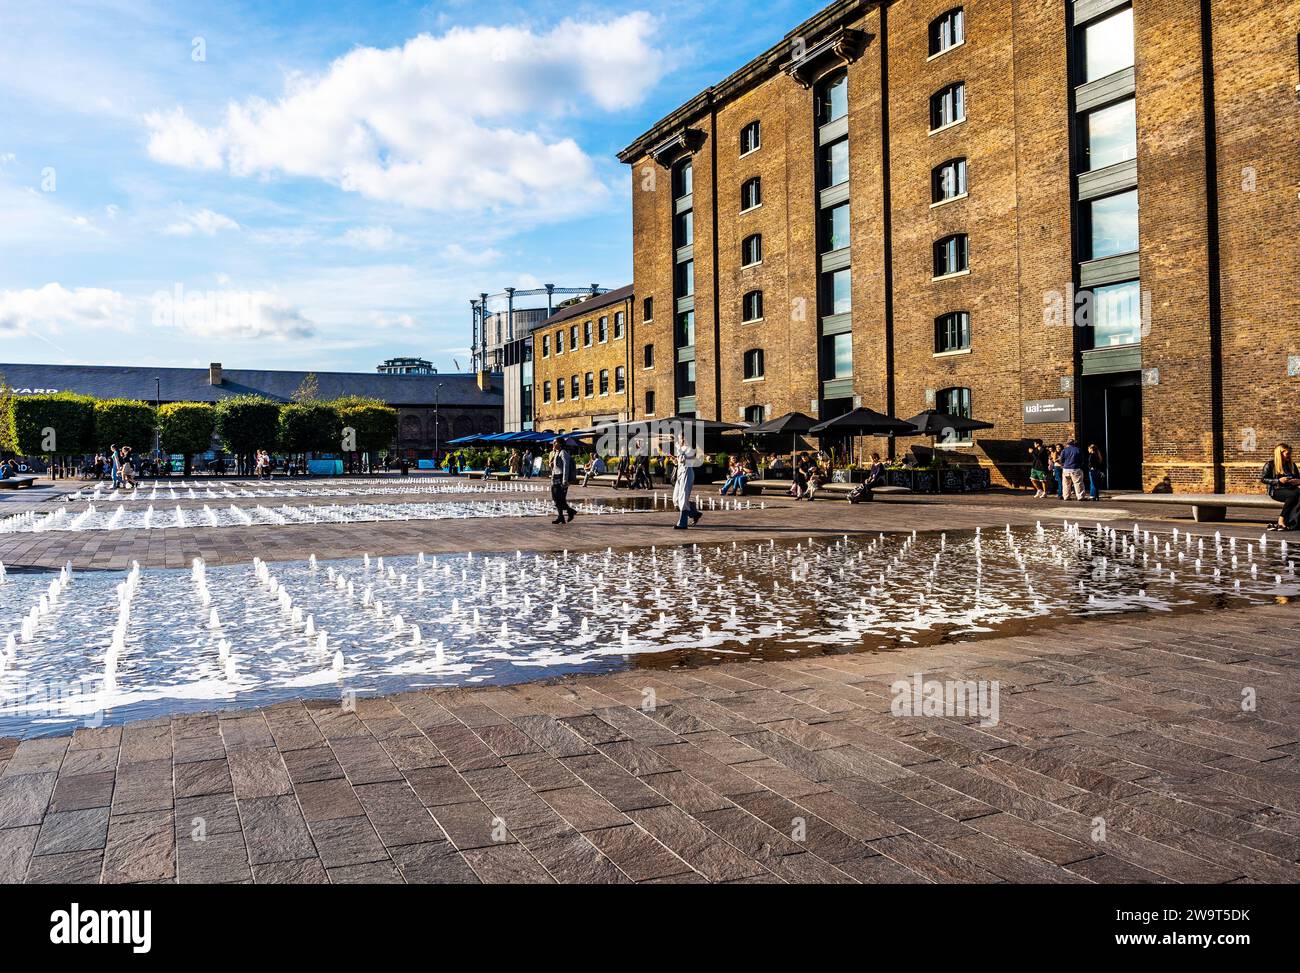 Fountains in Granary Square, in redeveloped King's Cross Central area near Regent's Canal, in London Borough of Camden, London, United Kingdom Stock Photo